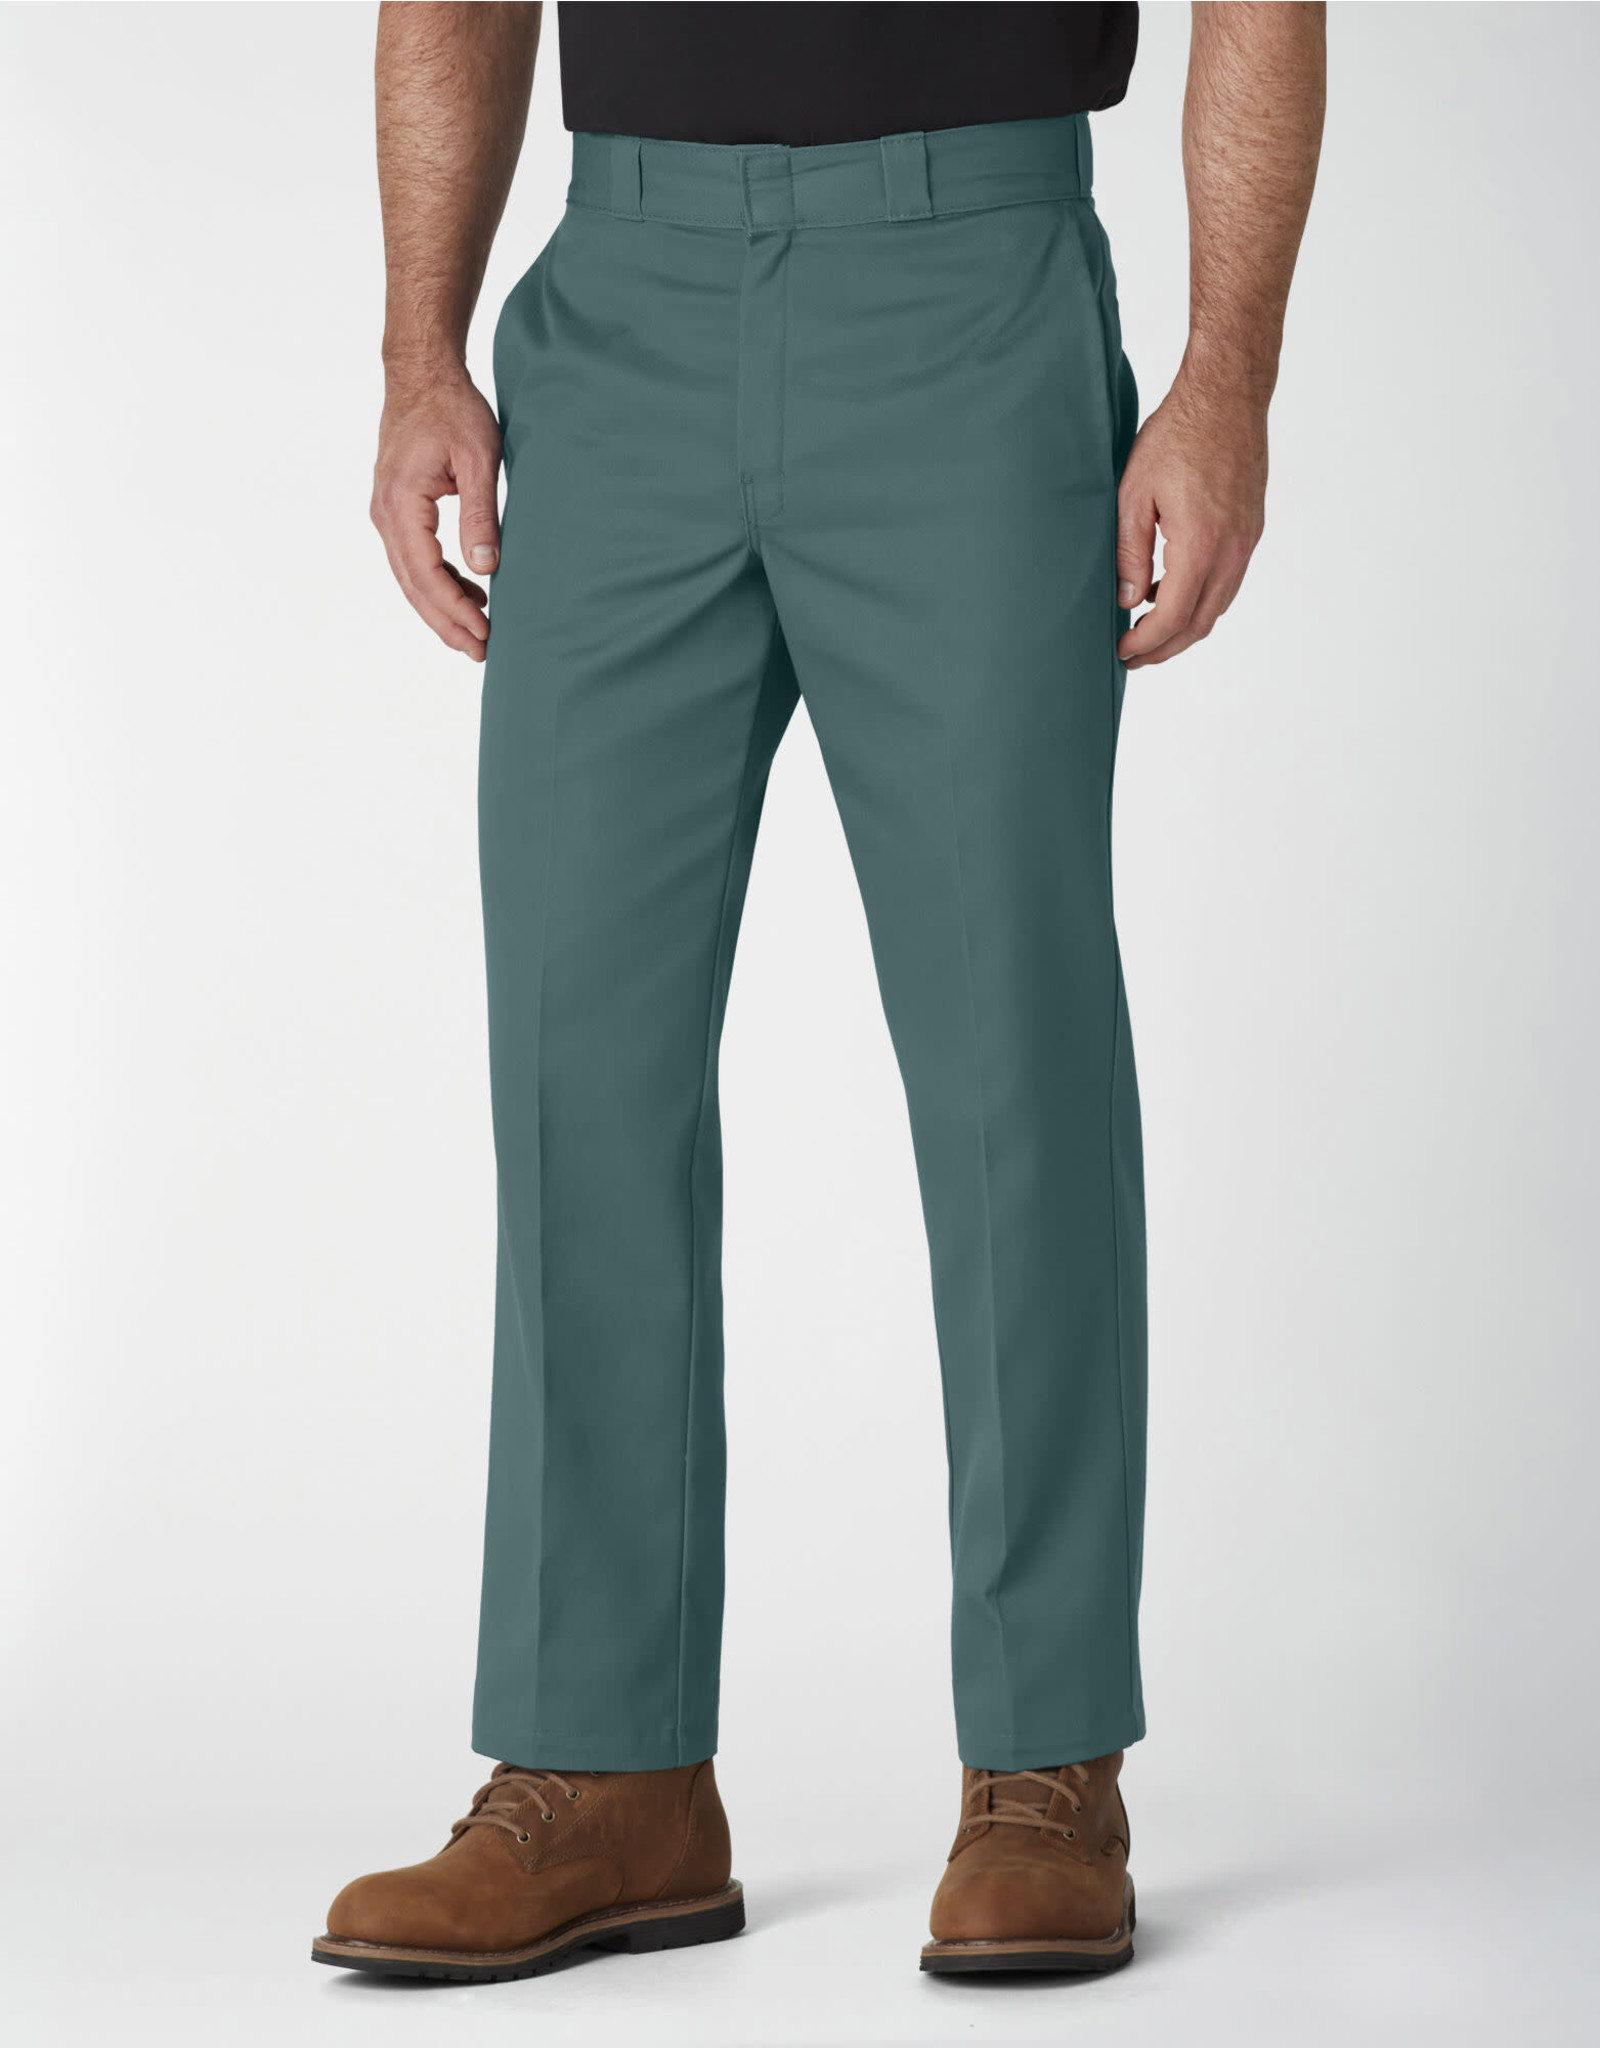 Collective Store - Dickies 874 Work Pant Flex - Lincoln Green